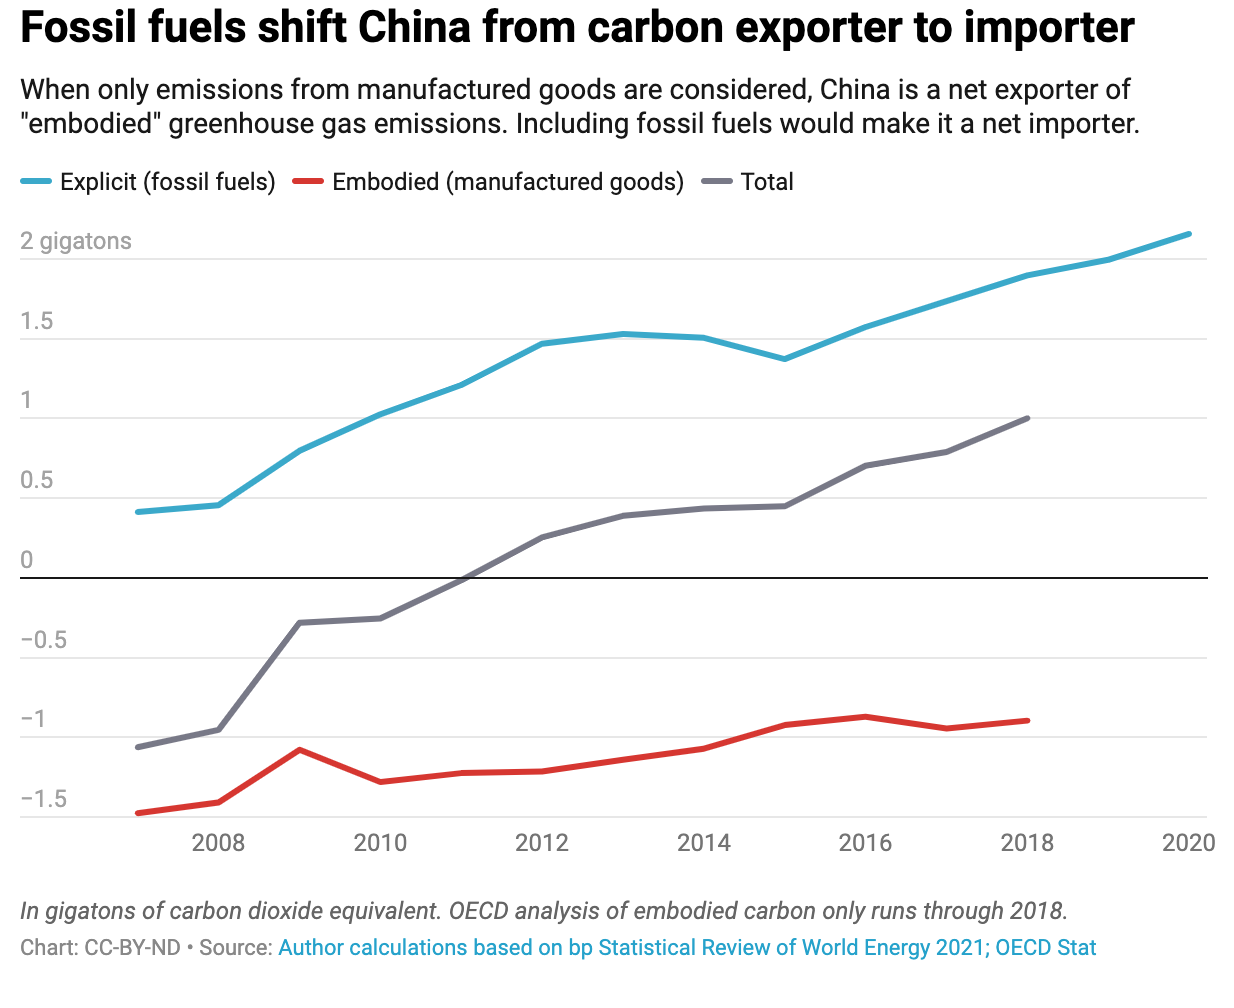 Fossil fuels shift China from carbon exporter to importer